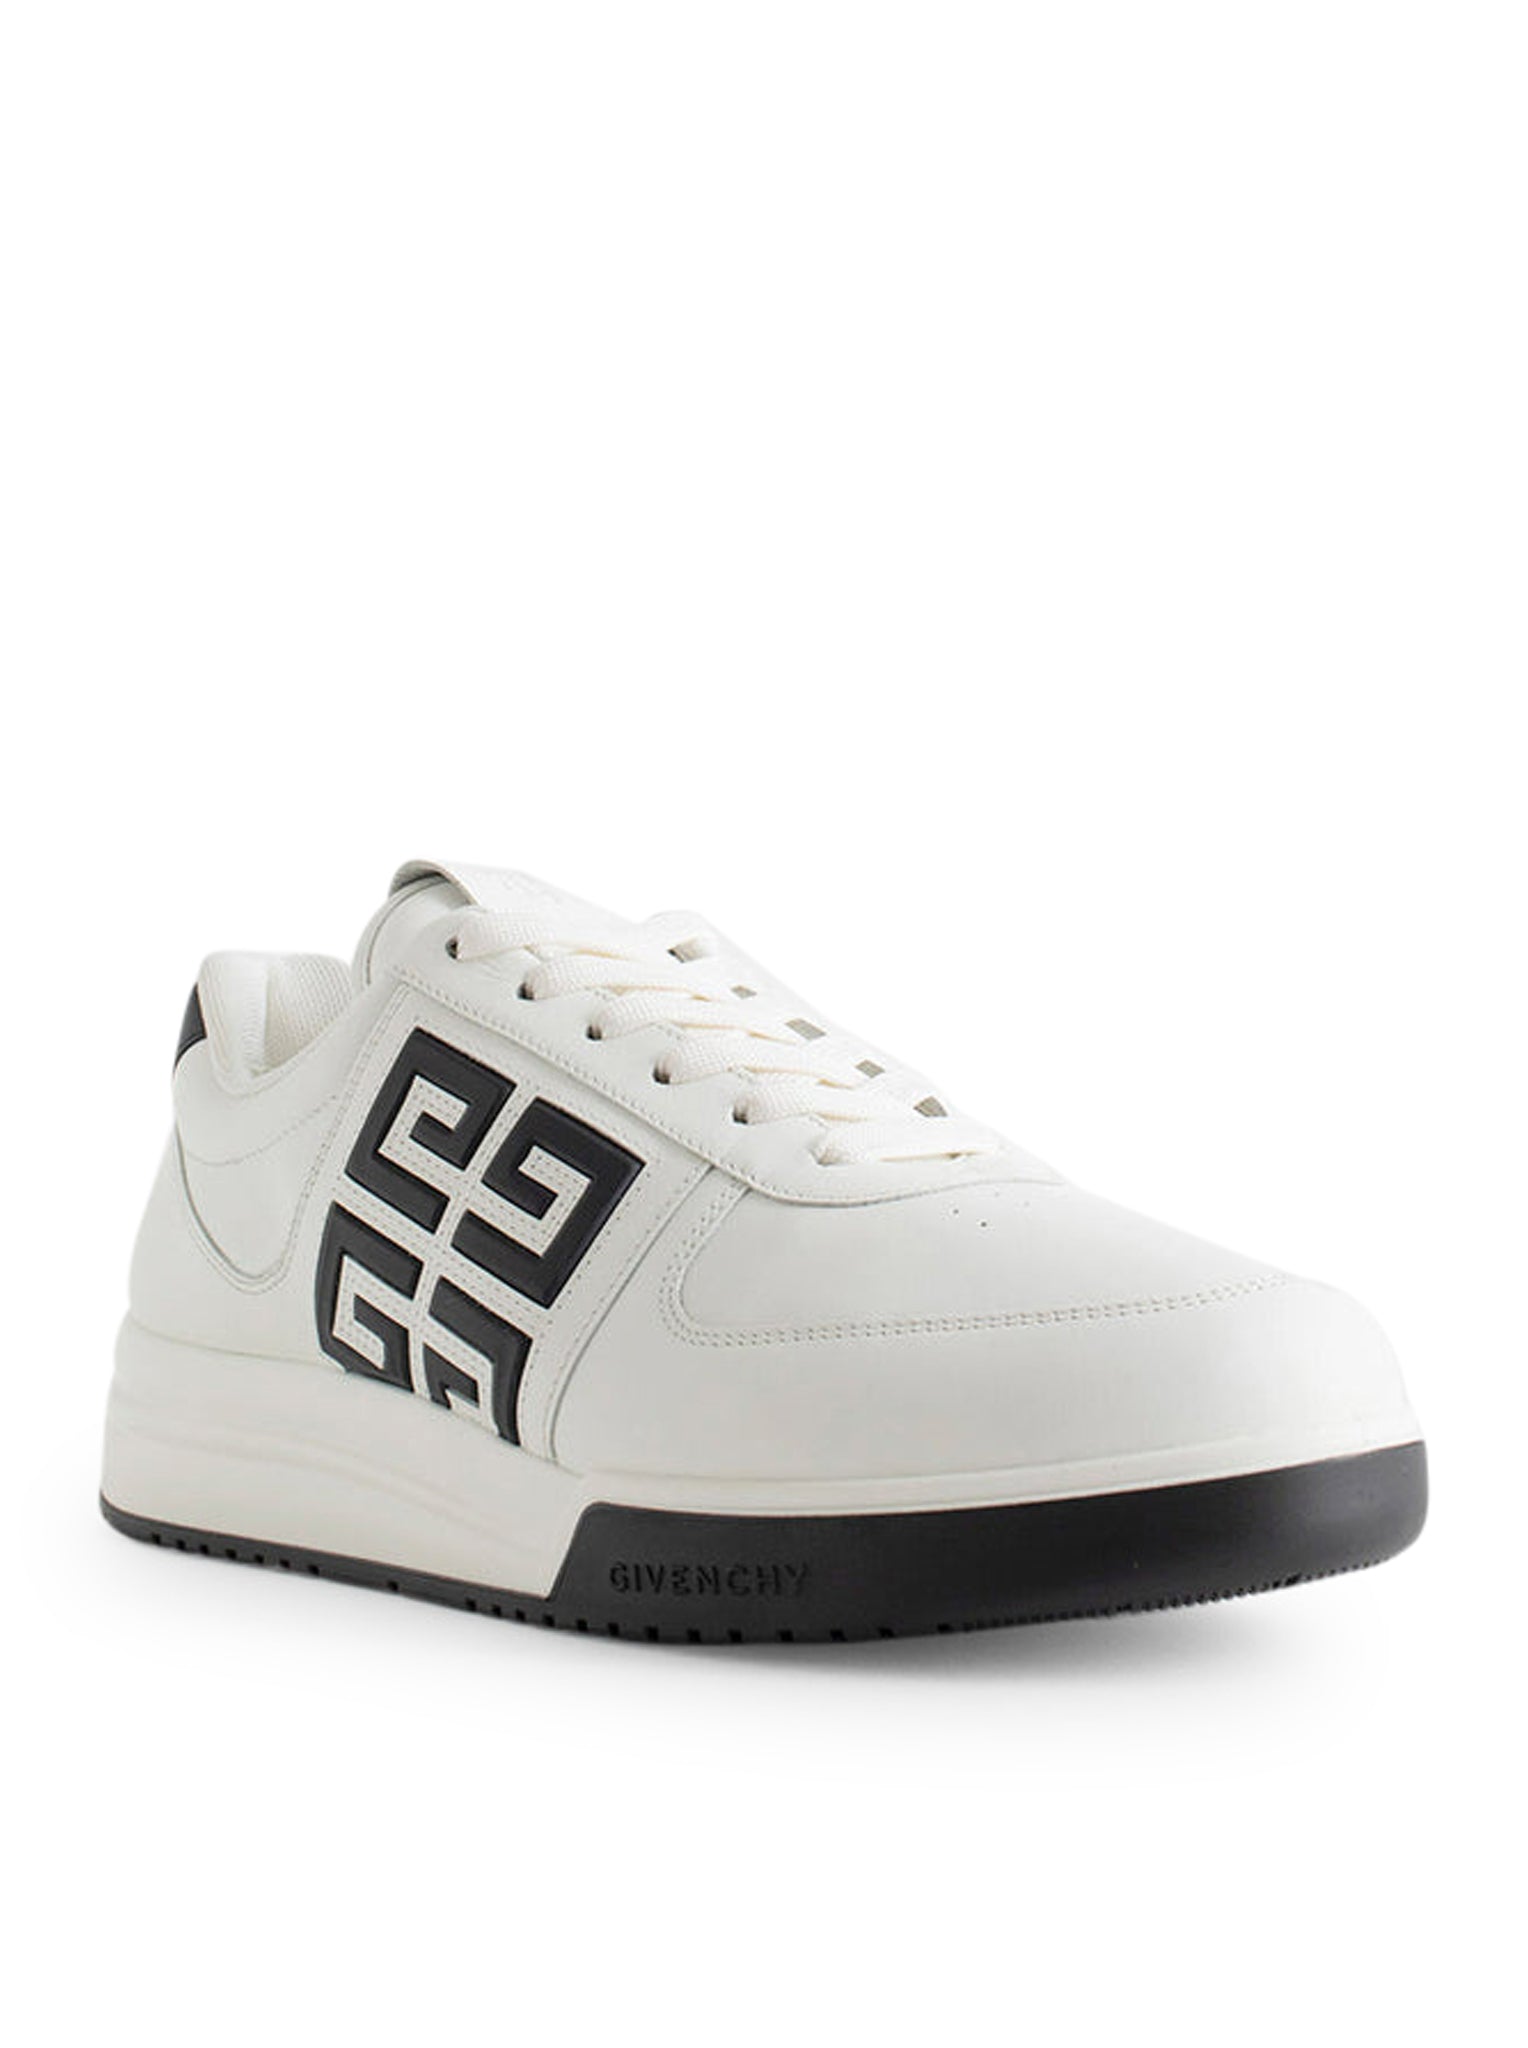 Givenchy G4 leather sneakers - Grey